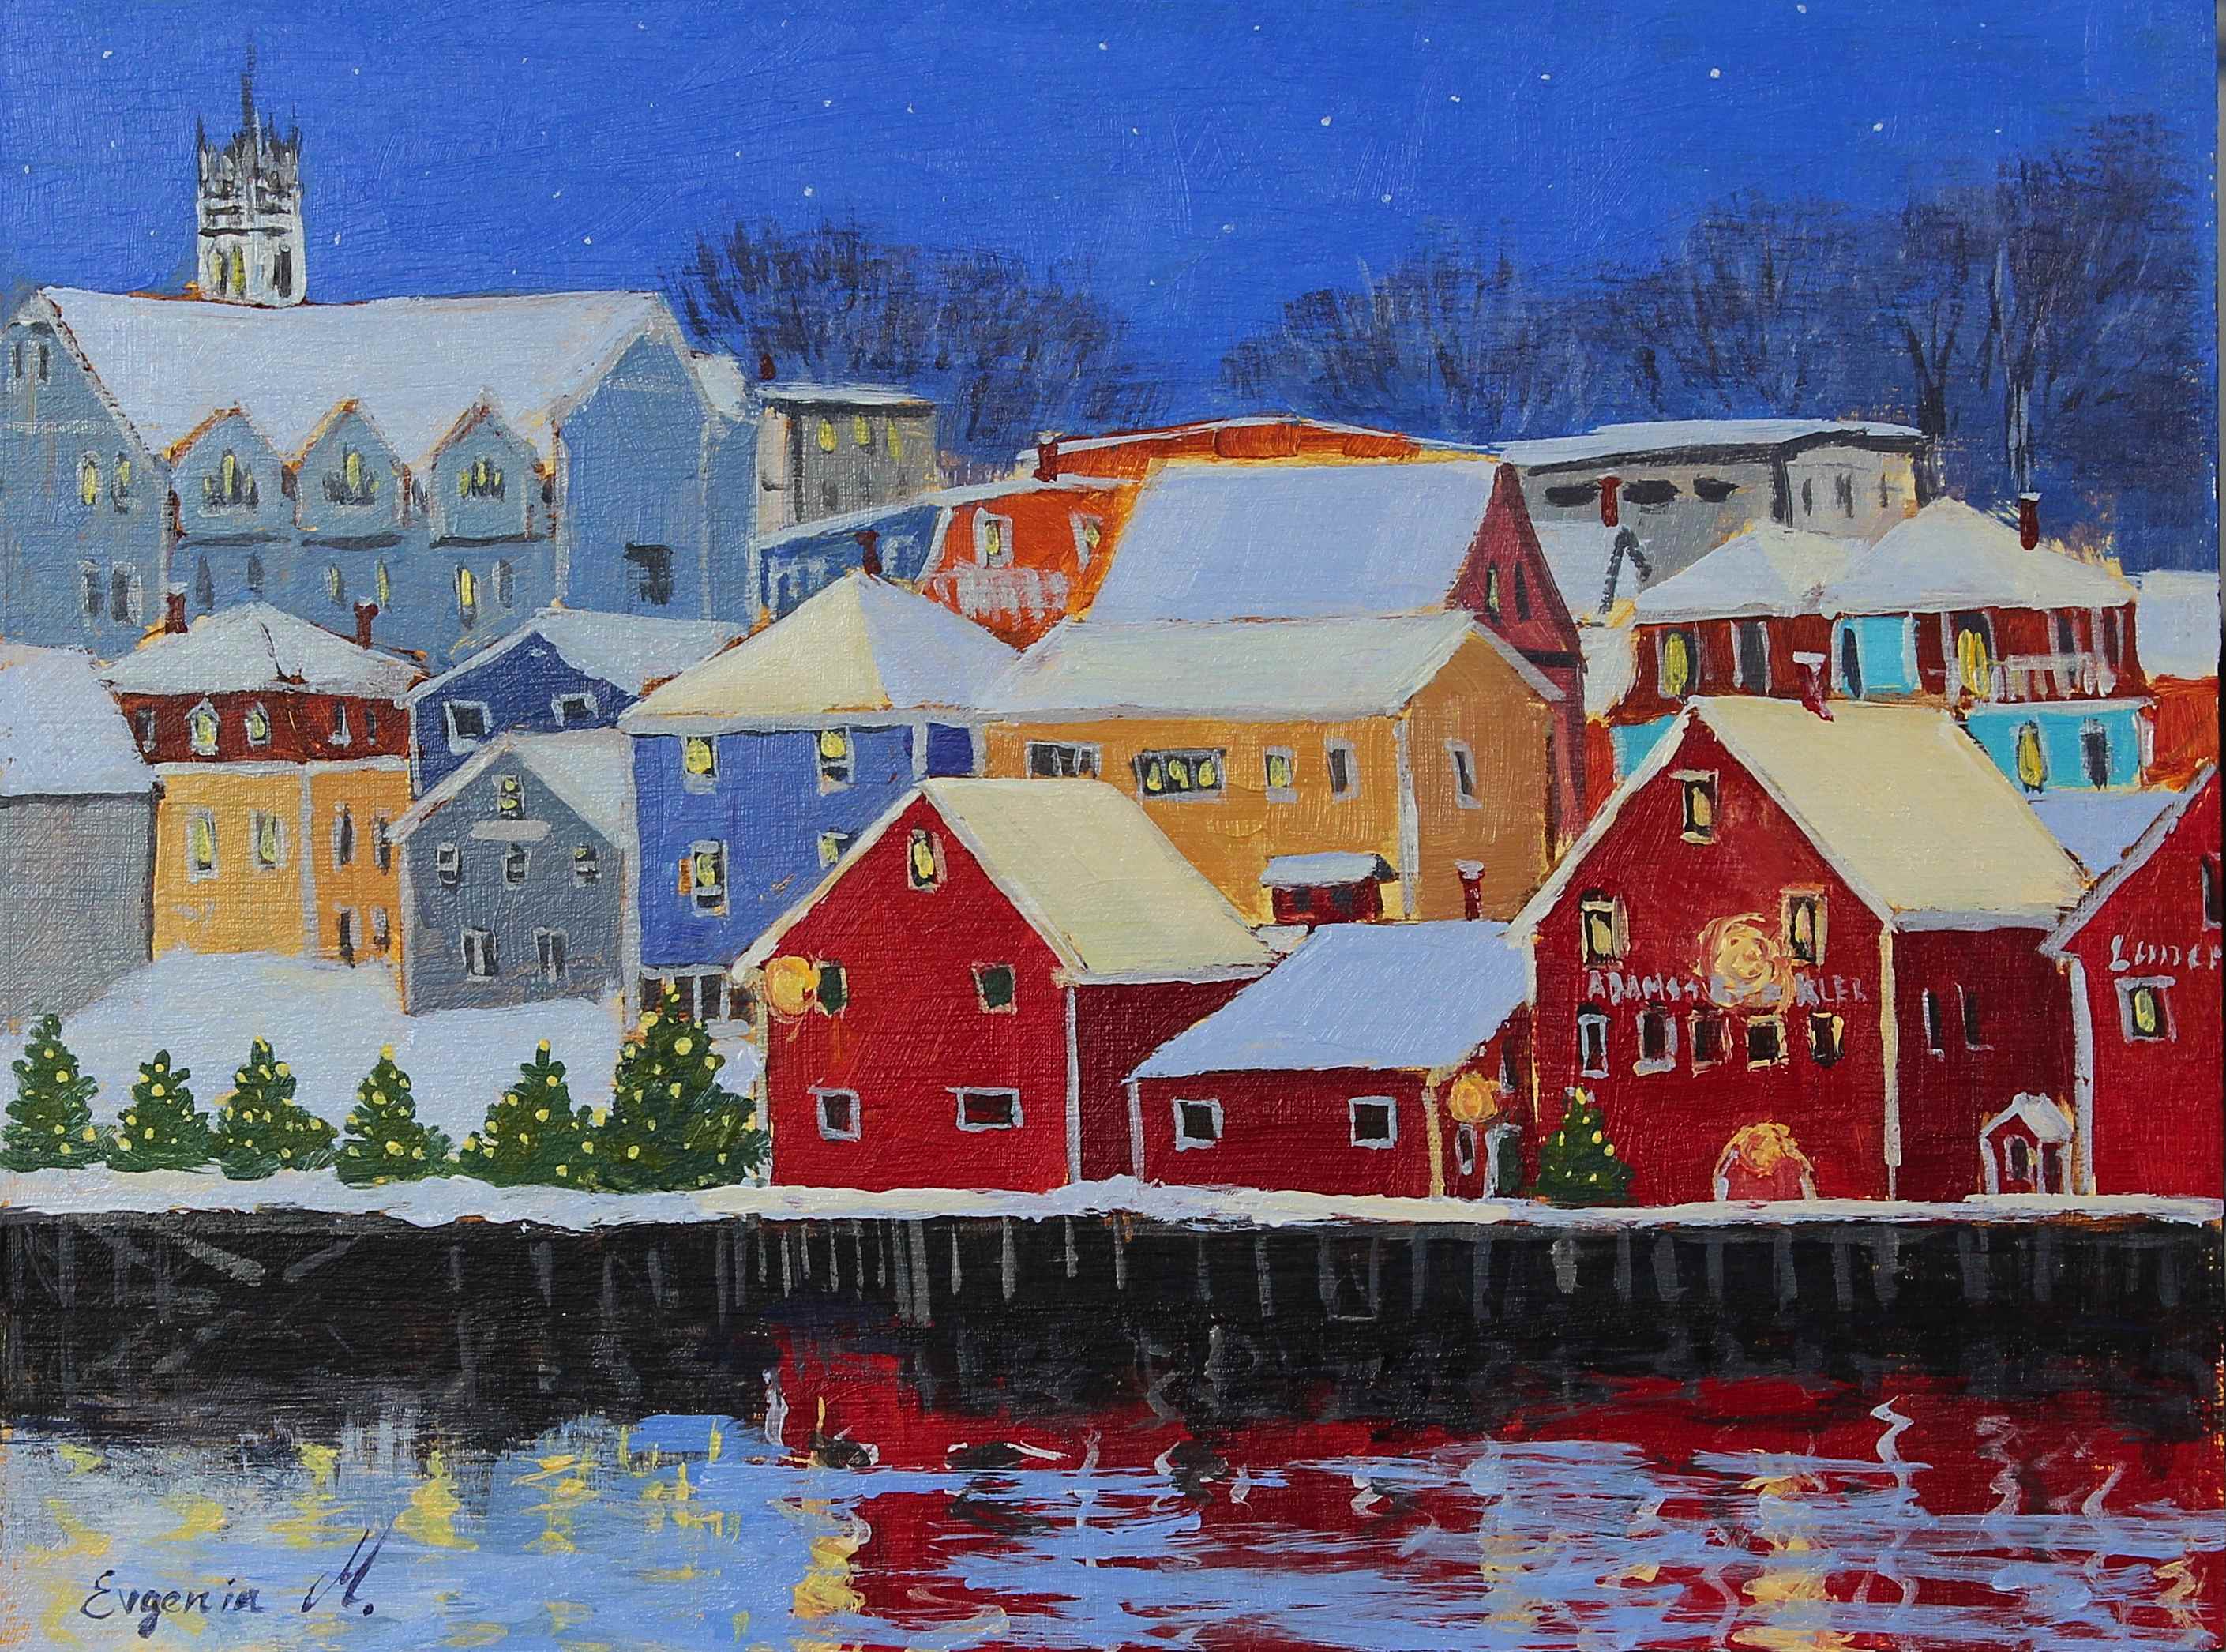 acrylic painting of Lunenburg town with snow on Christmas night